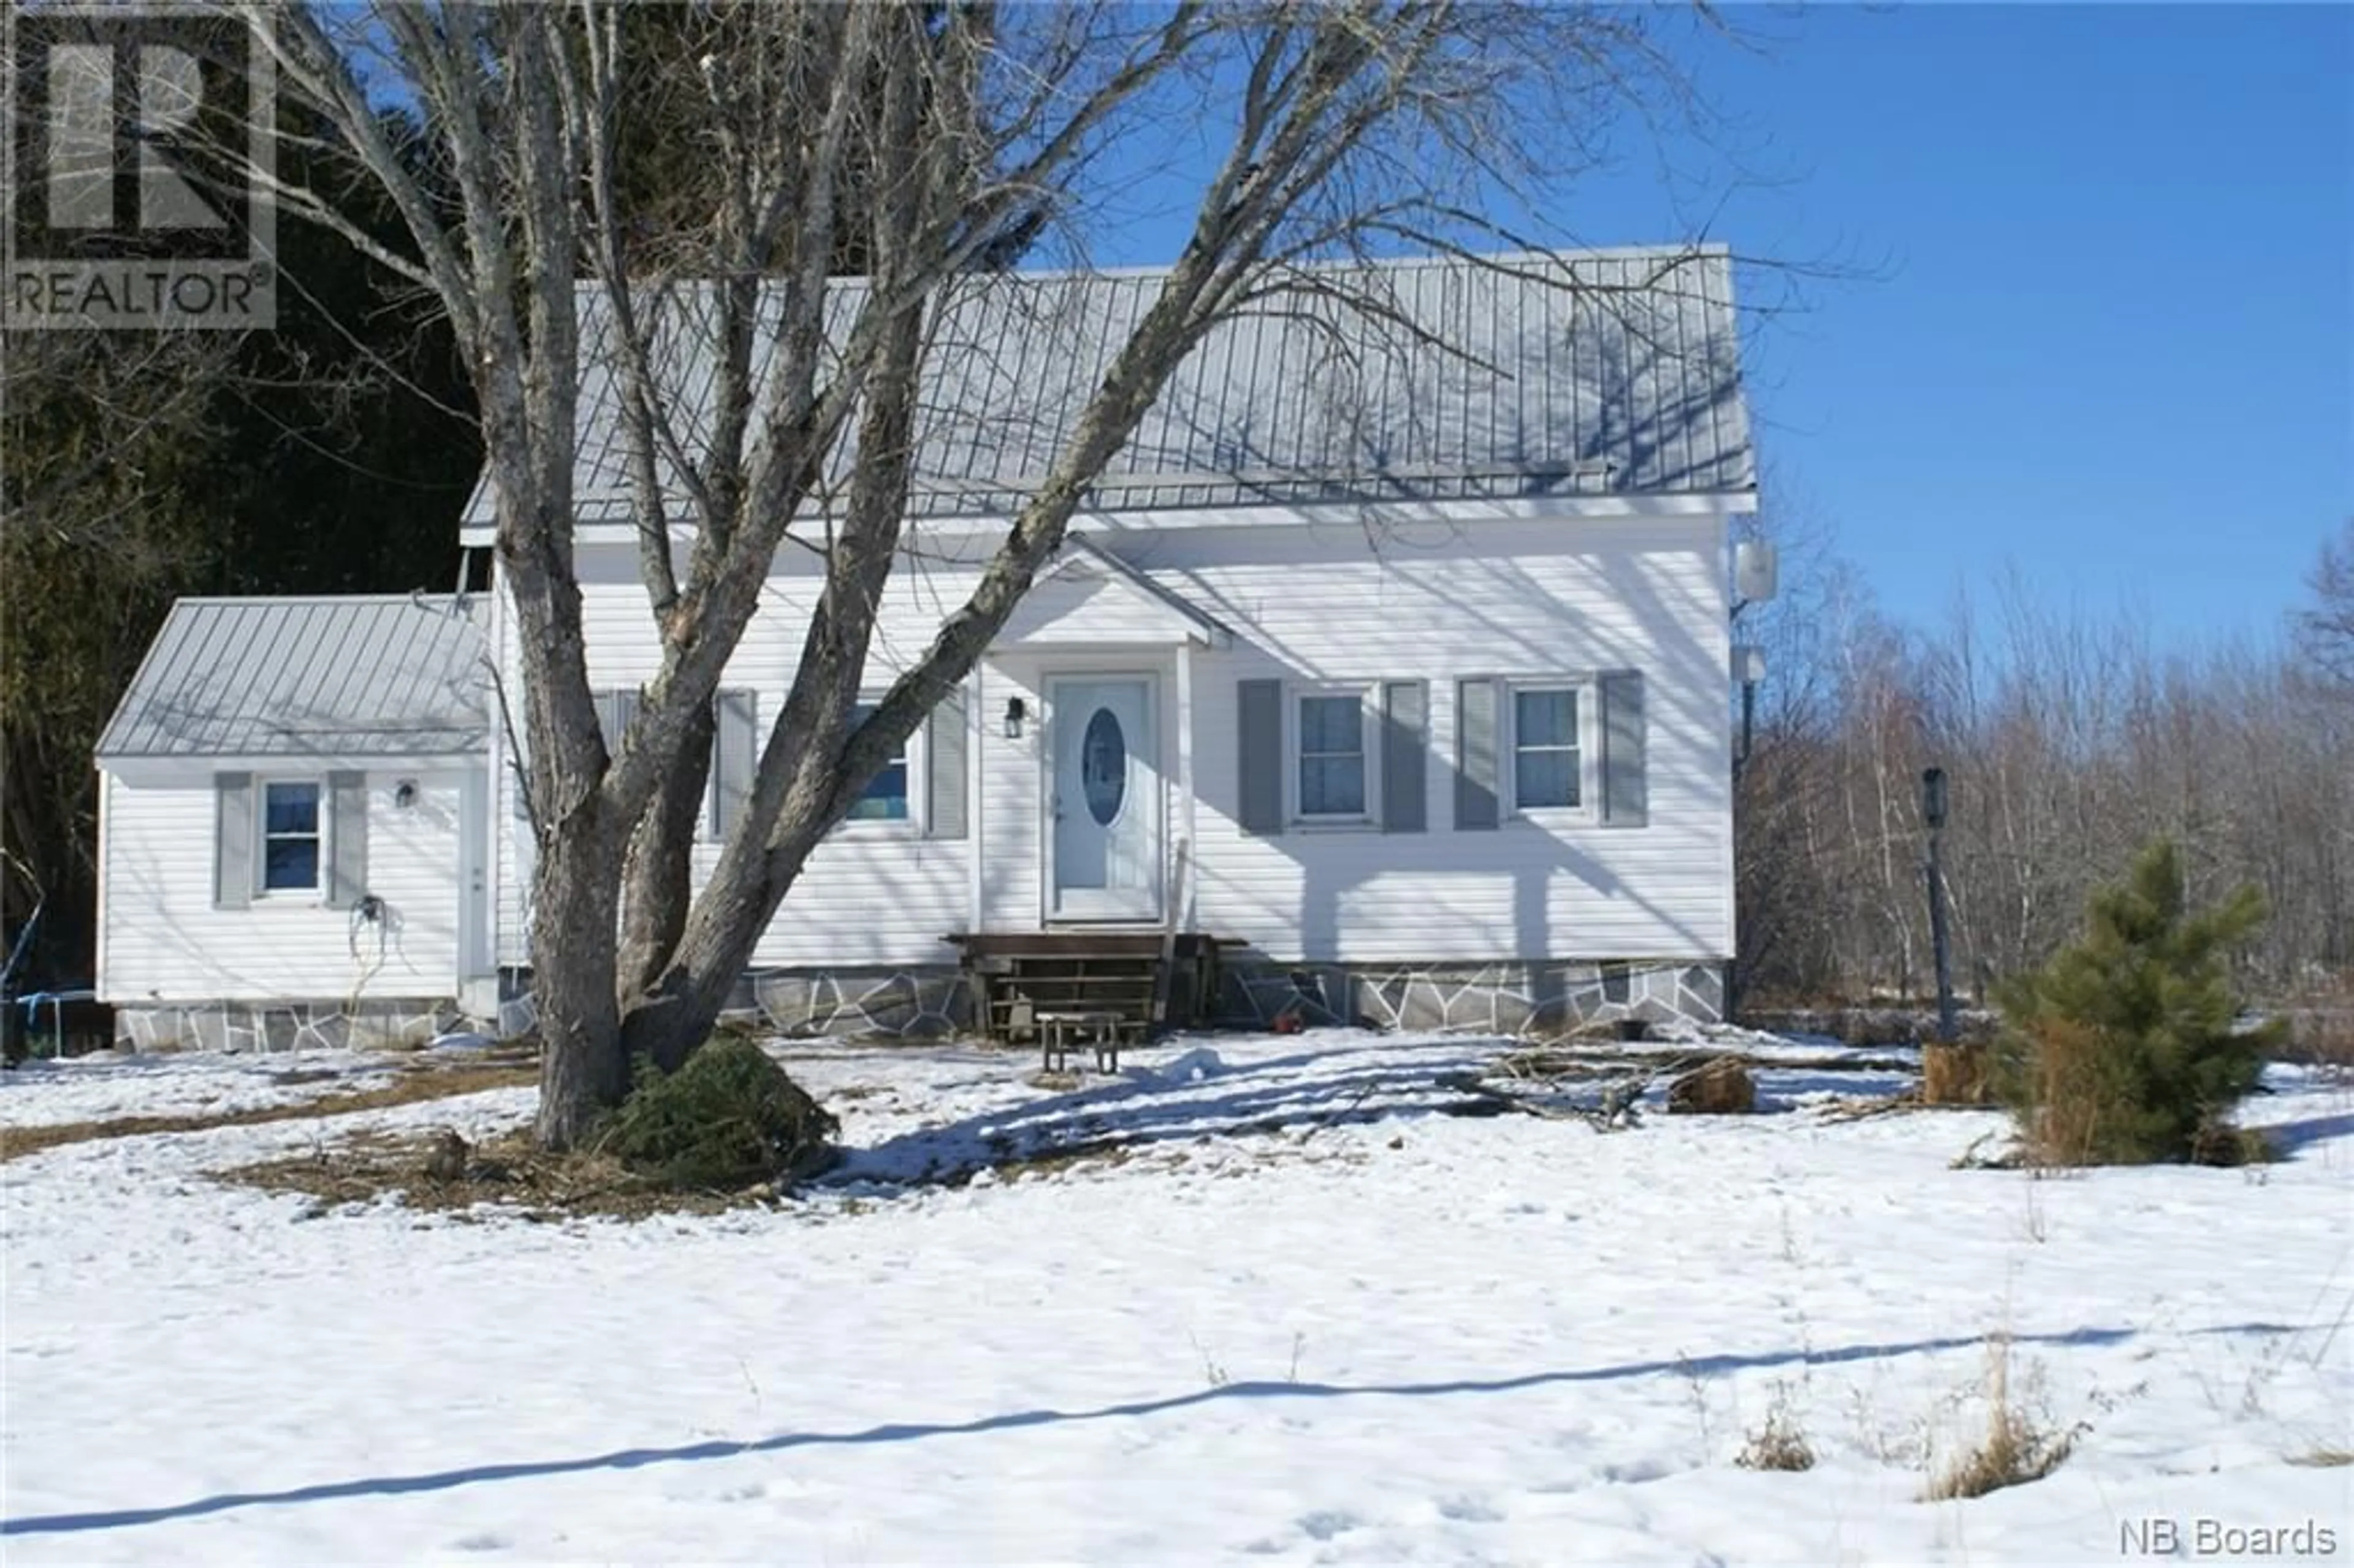 Home with unknown exterior material for 540 Scotchtown Road, Scotchtown New Brunswick E4B1X8